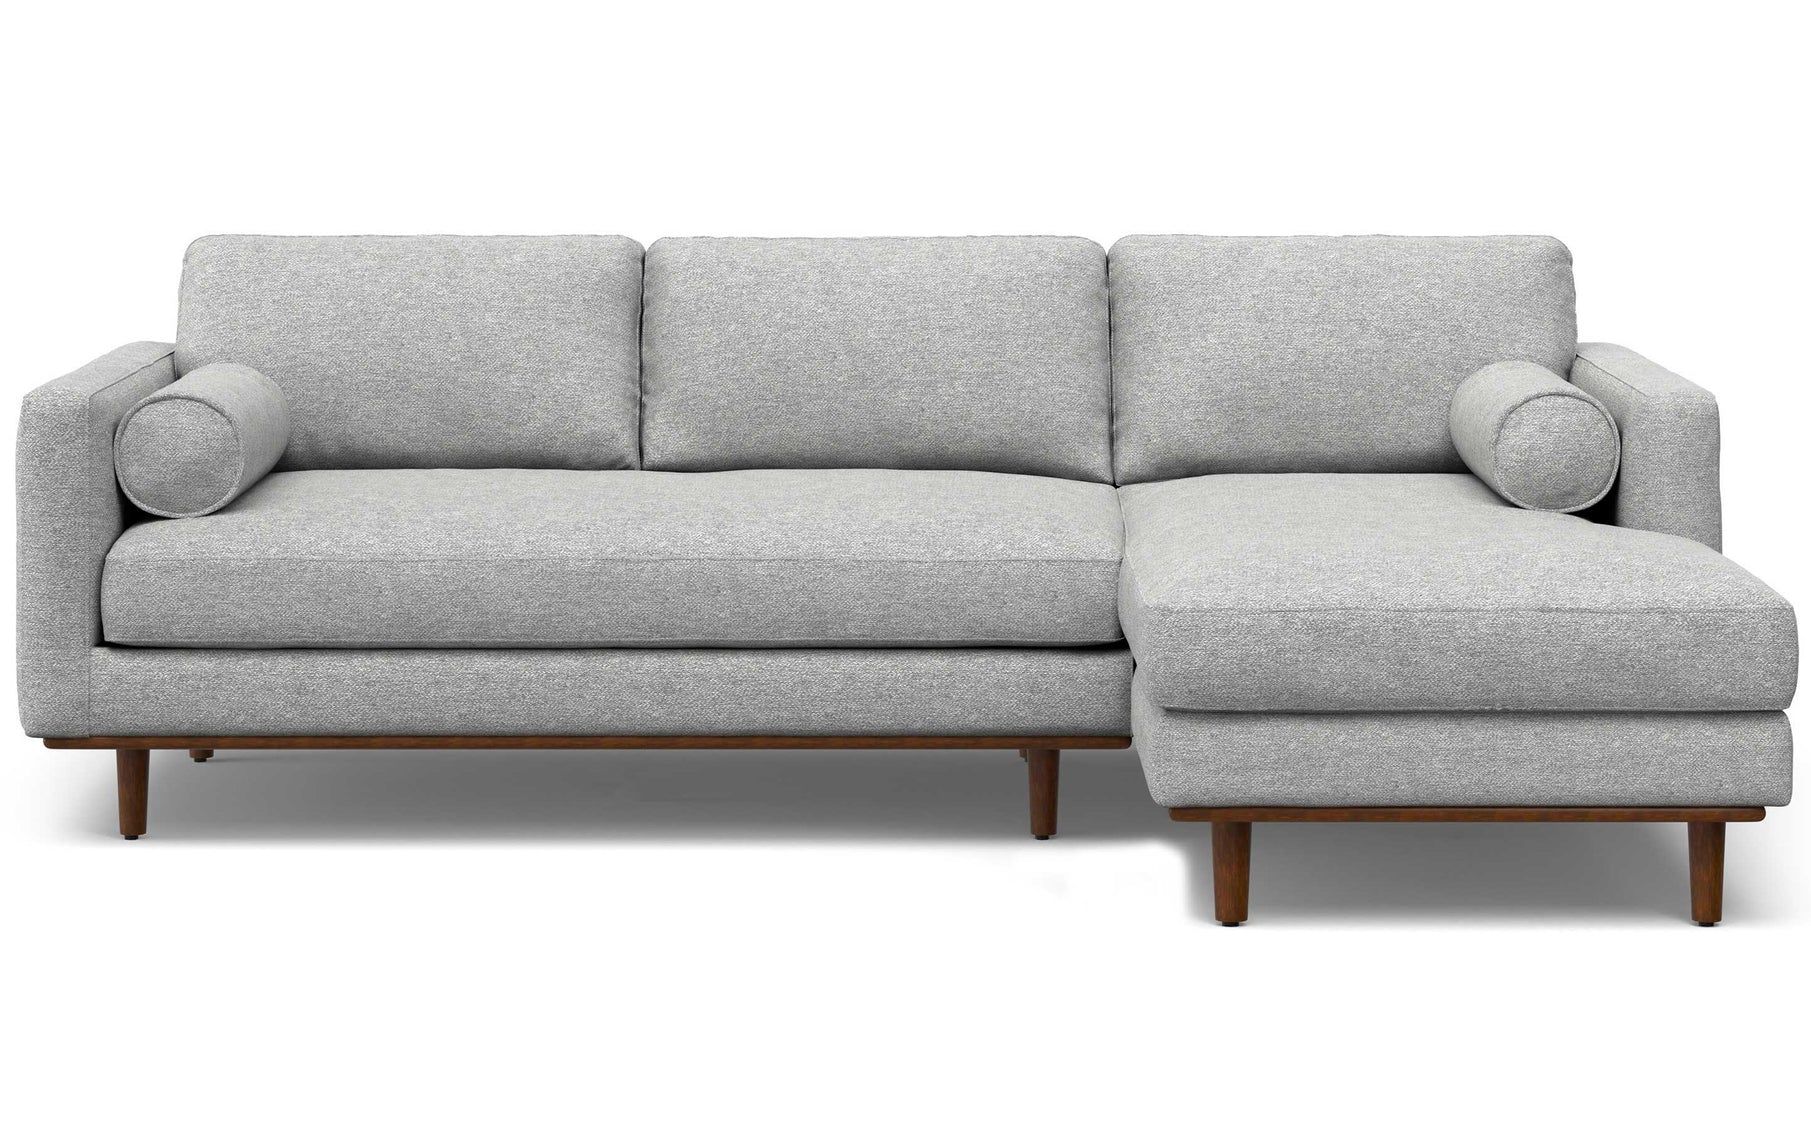 Mist Grey Woven Polyester Fabric | Morrison Mid Century Sectional